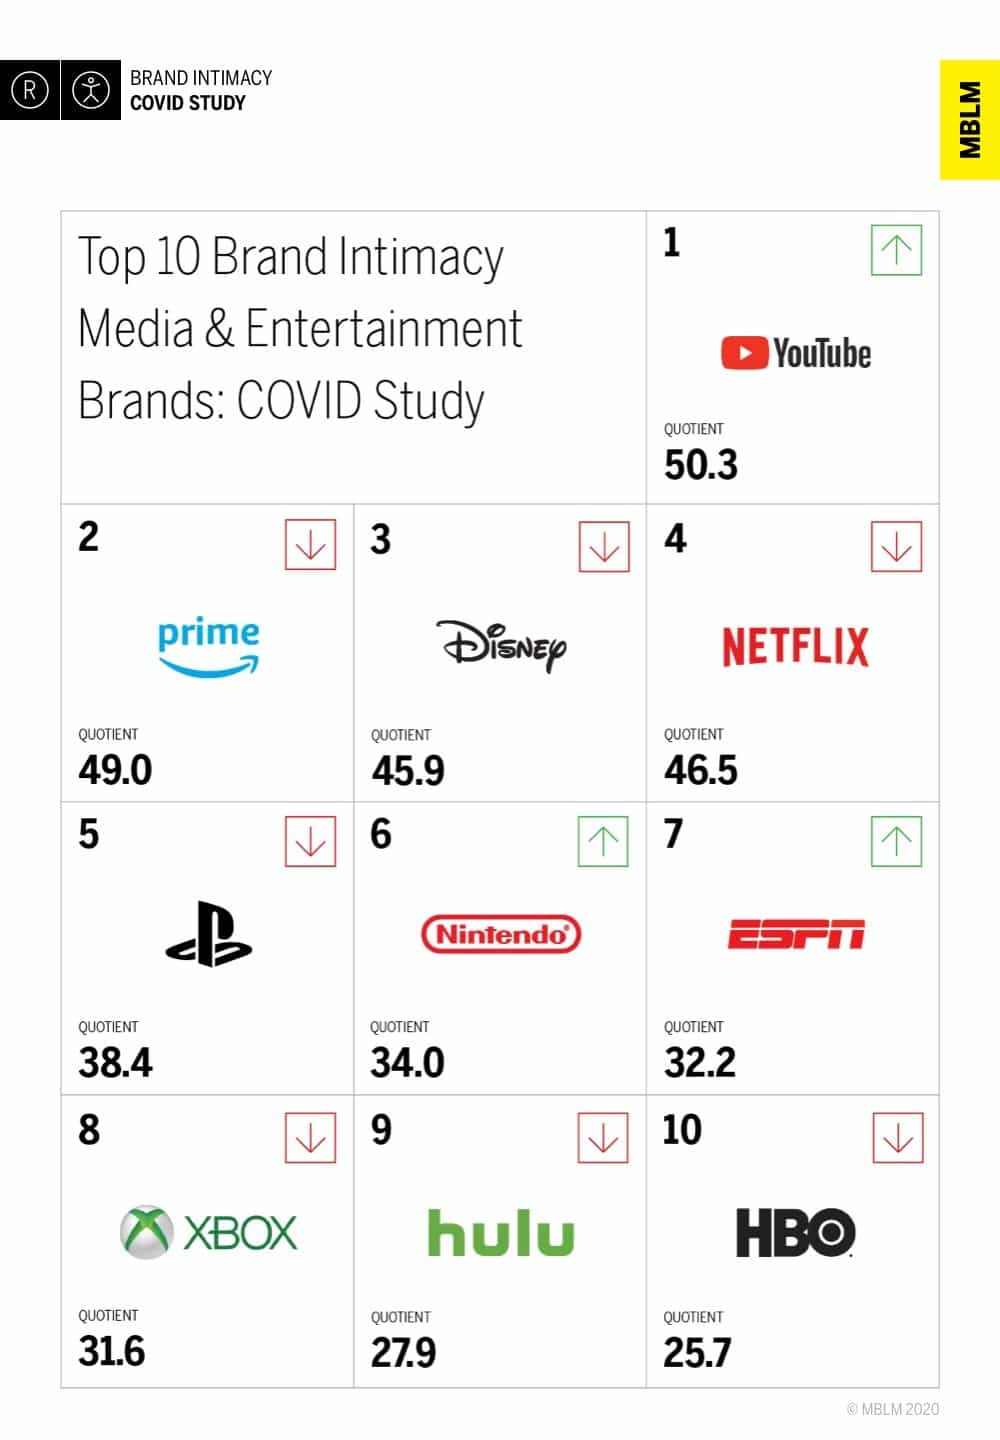 Media & entertainment ranks first in brand intimacy during COVID